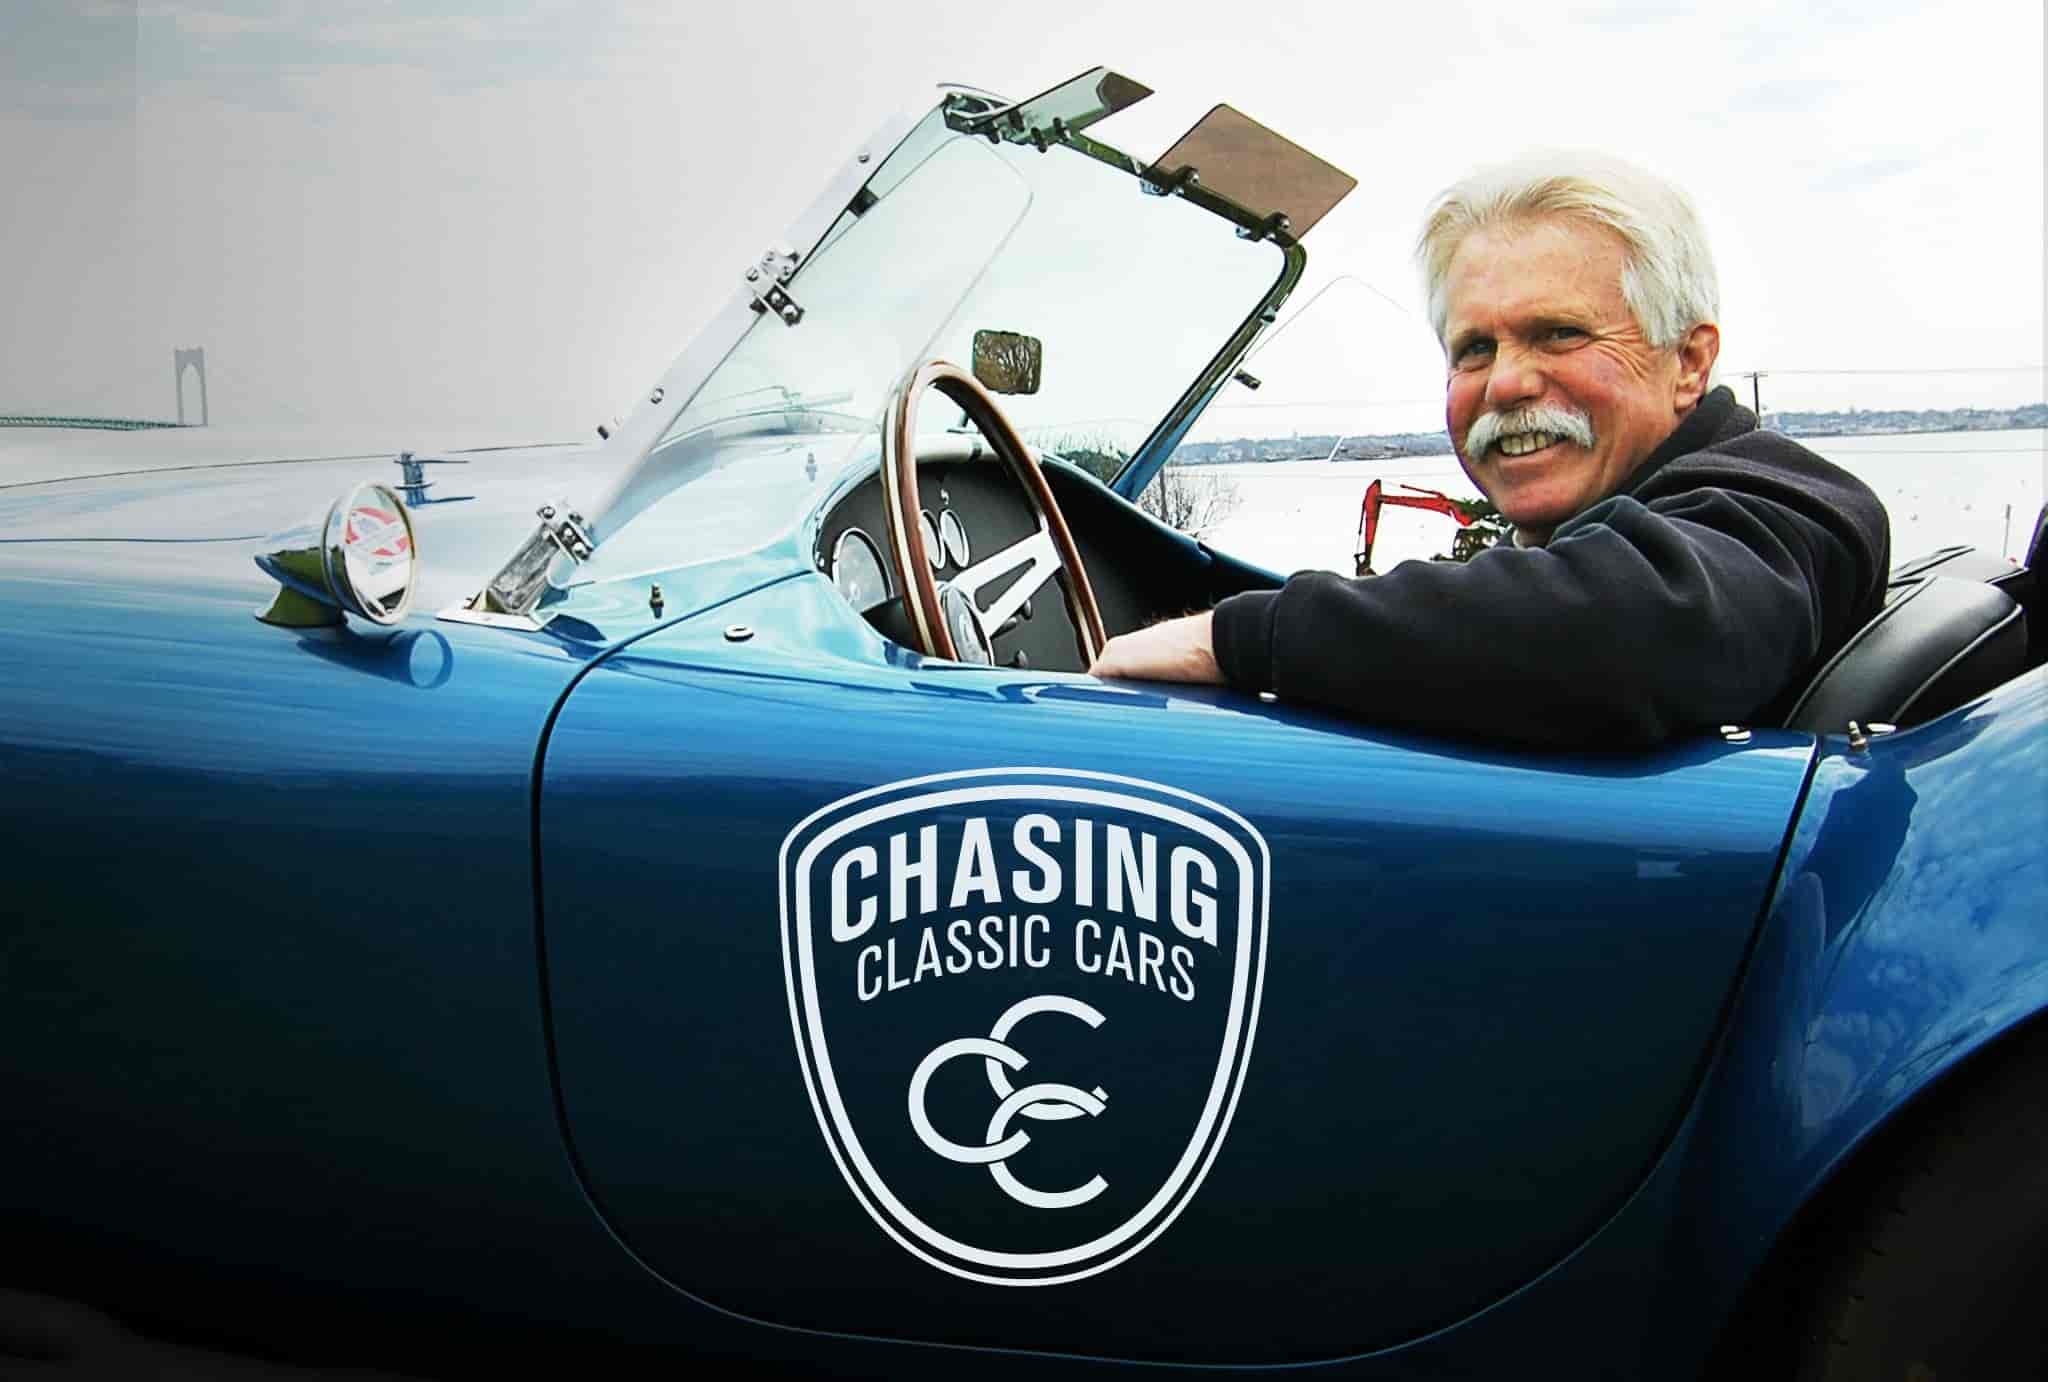 Image of Wayne Carini as the star of the show Chasing Classic Cars